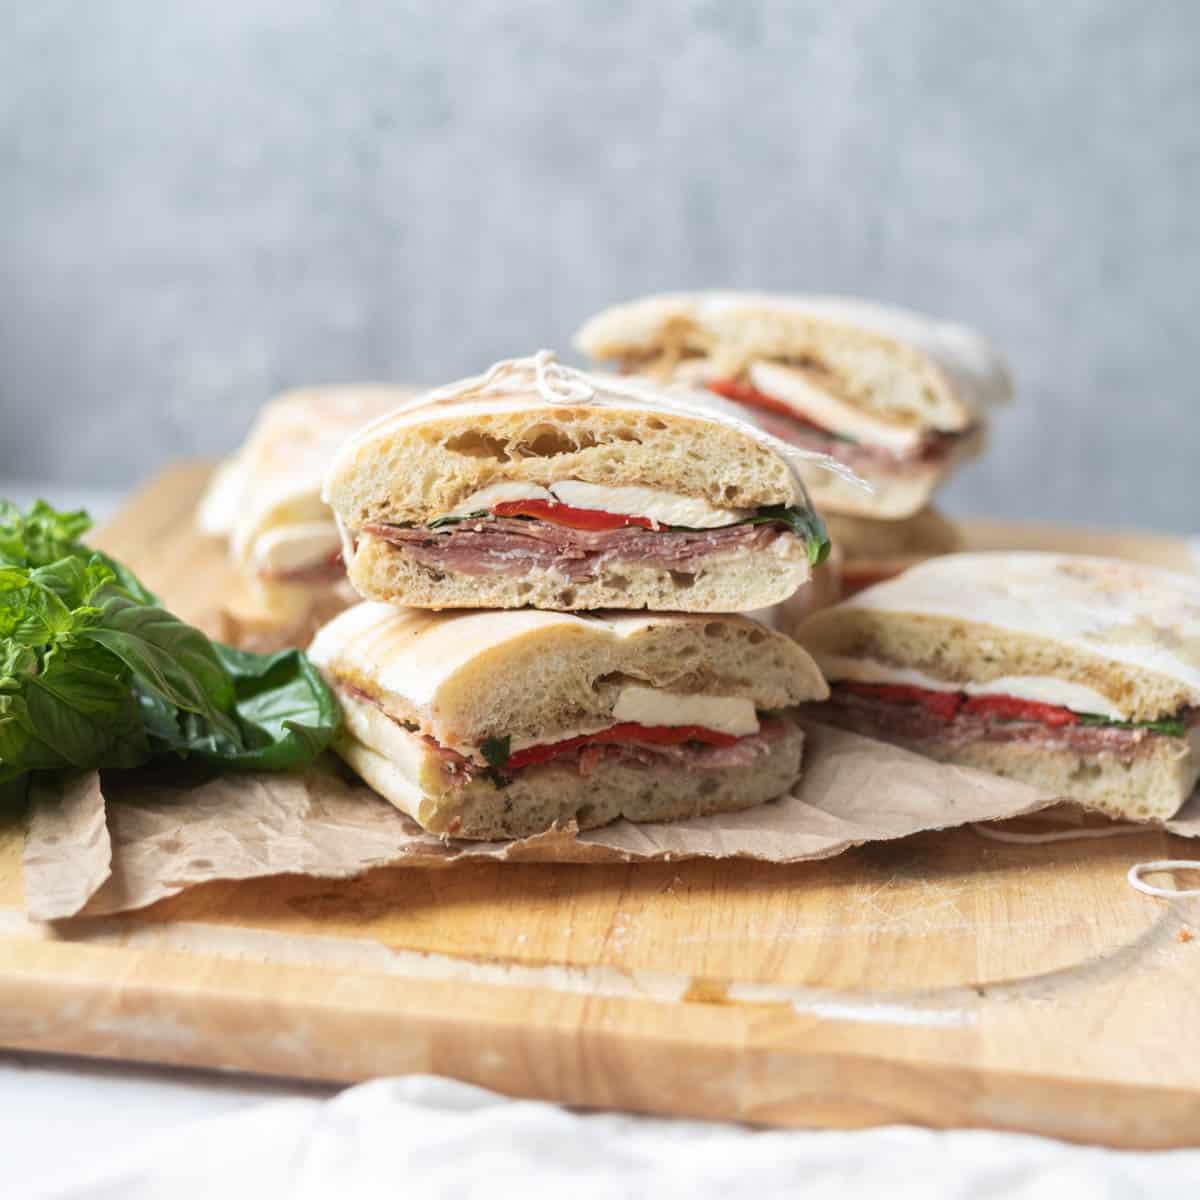 Italian sandwiches stacked on top of each other on a wooden cutting board and brown paper next to basil leaves